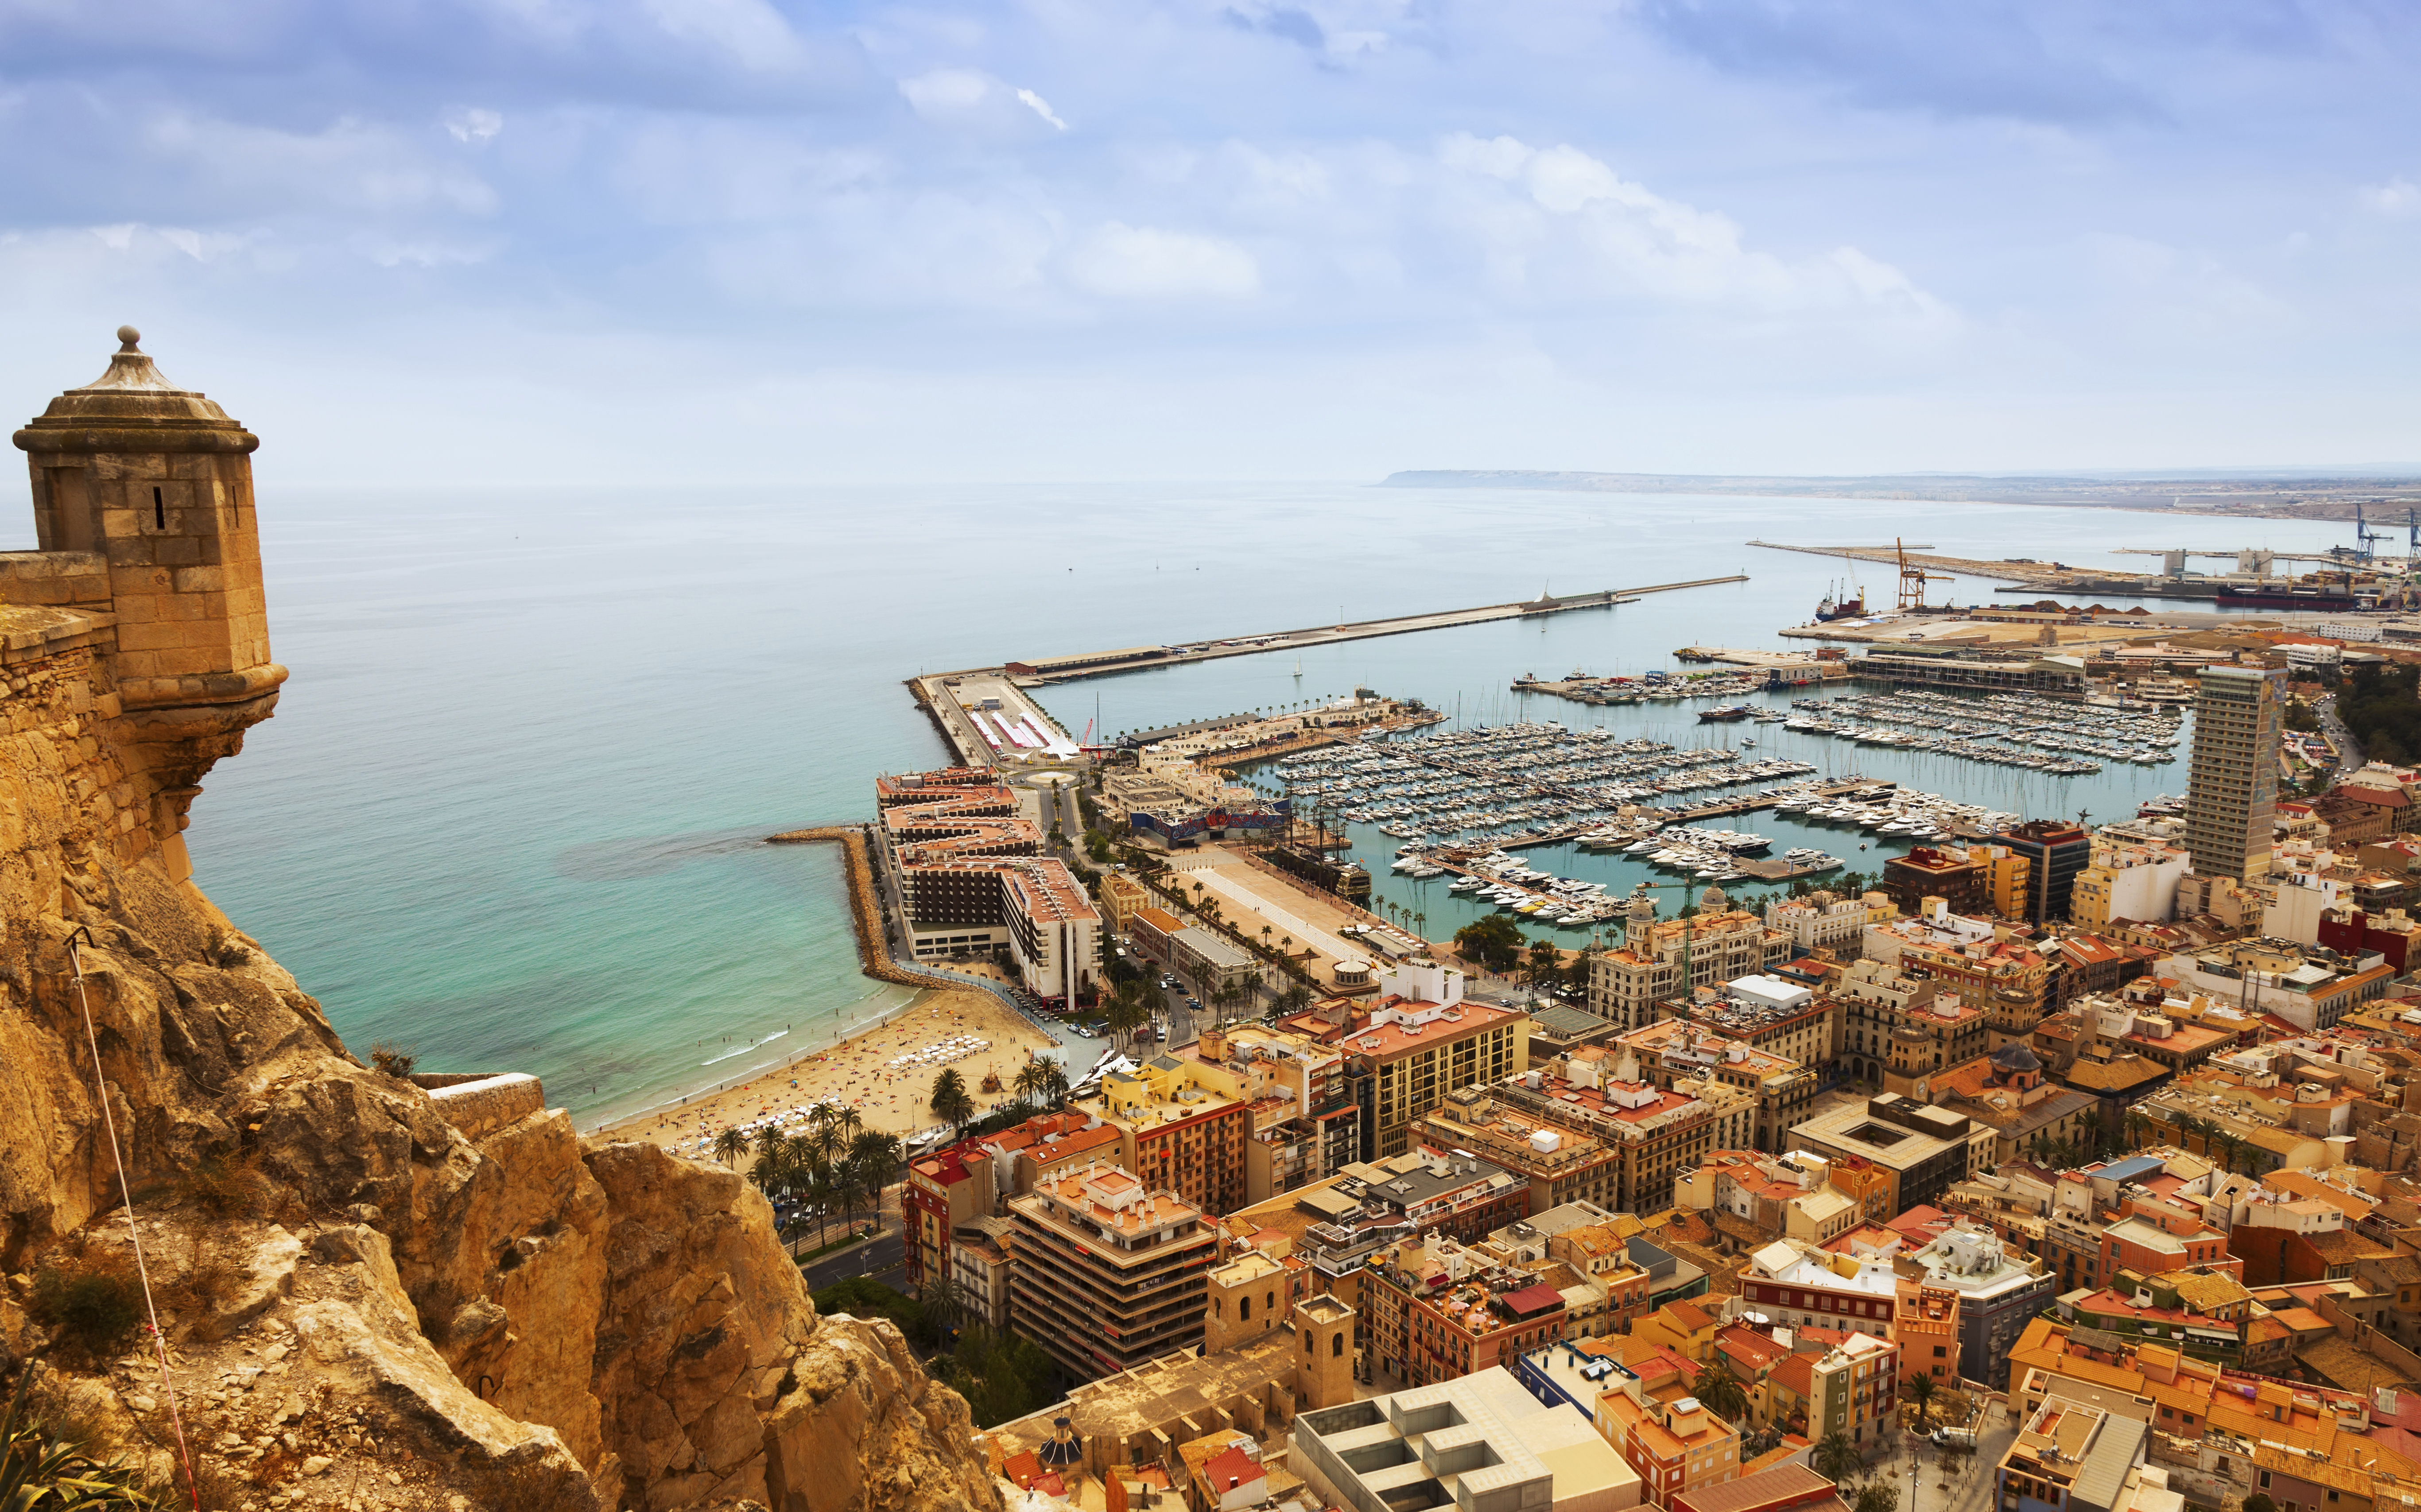 Top 15 Attractions And Things To Do In Alicante Skyscanners Travel Blog 6178